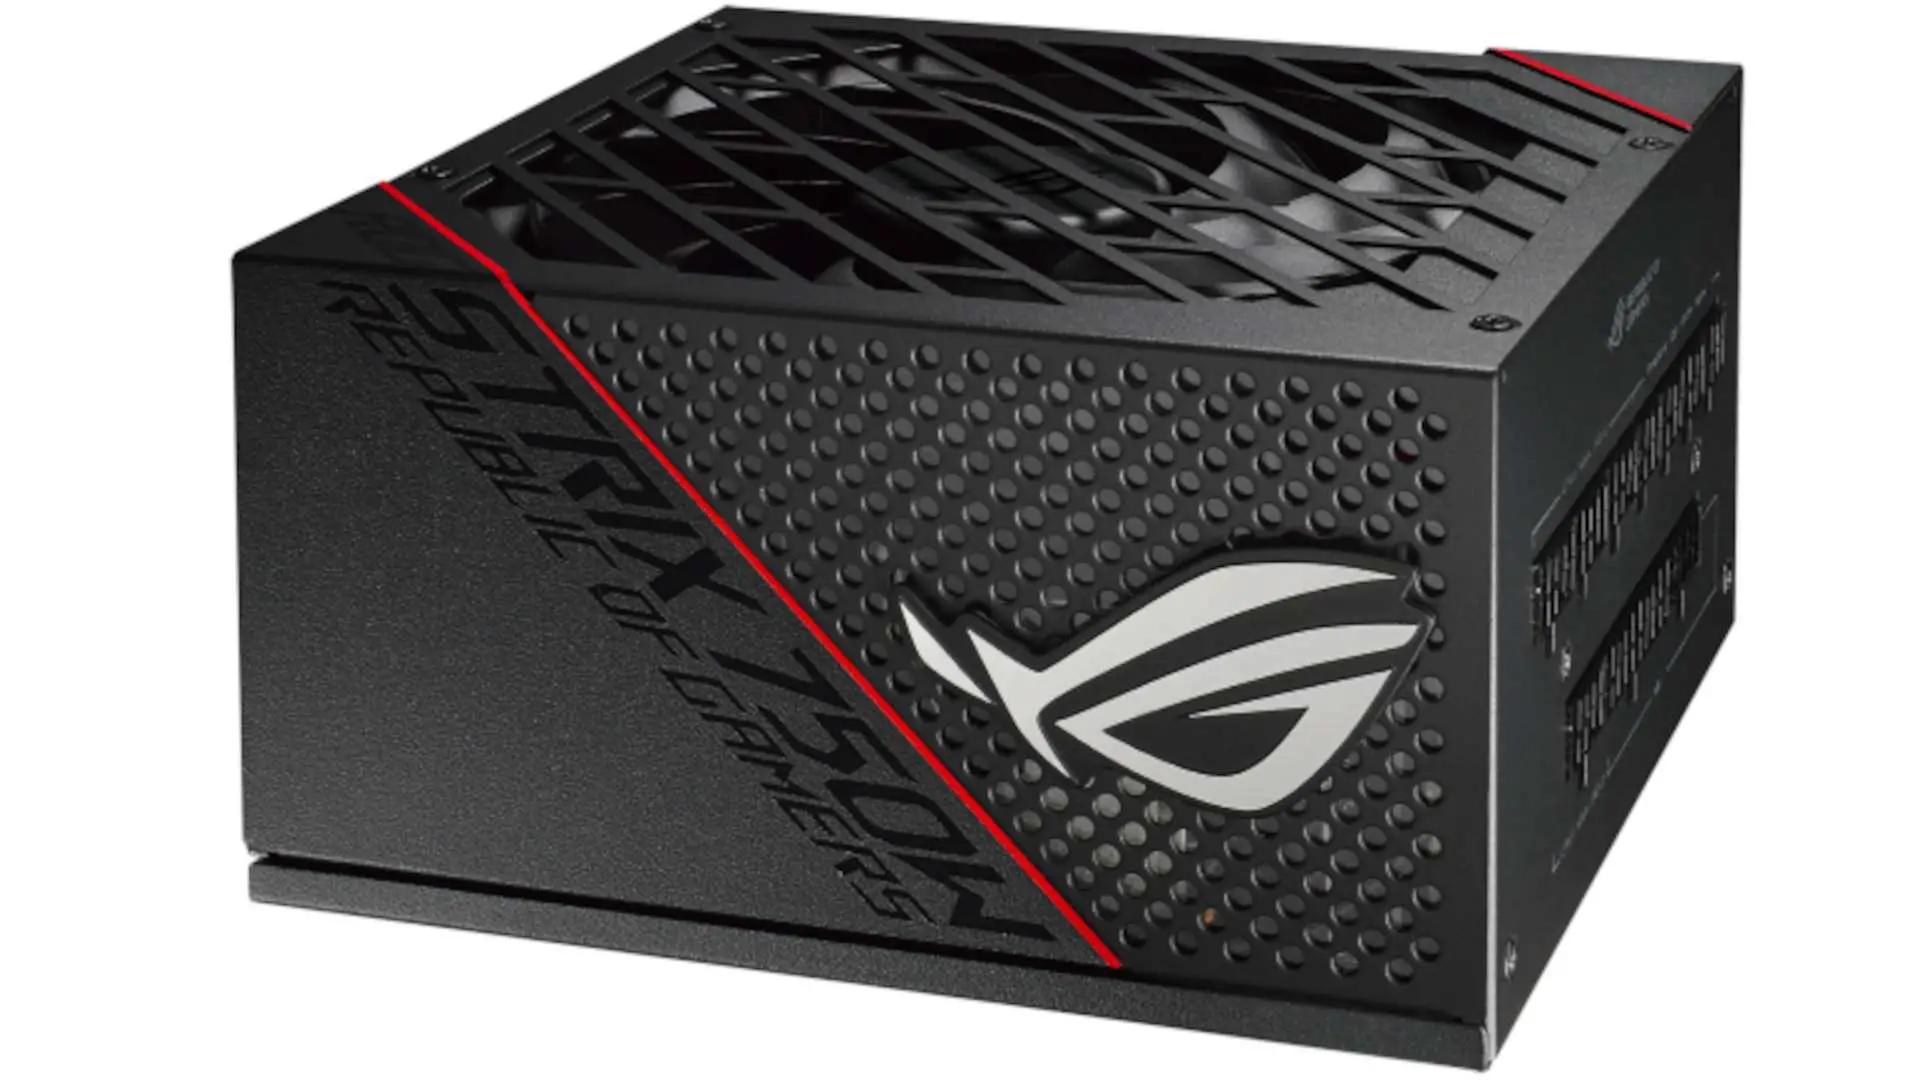 You are currently viewing ROG STRIX 750W Gold (16-pin cable) Power Supply Review